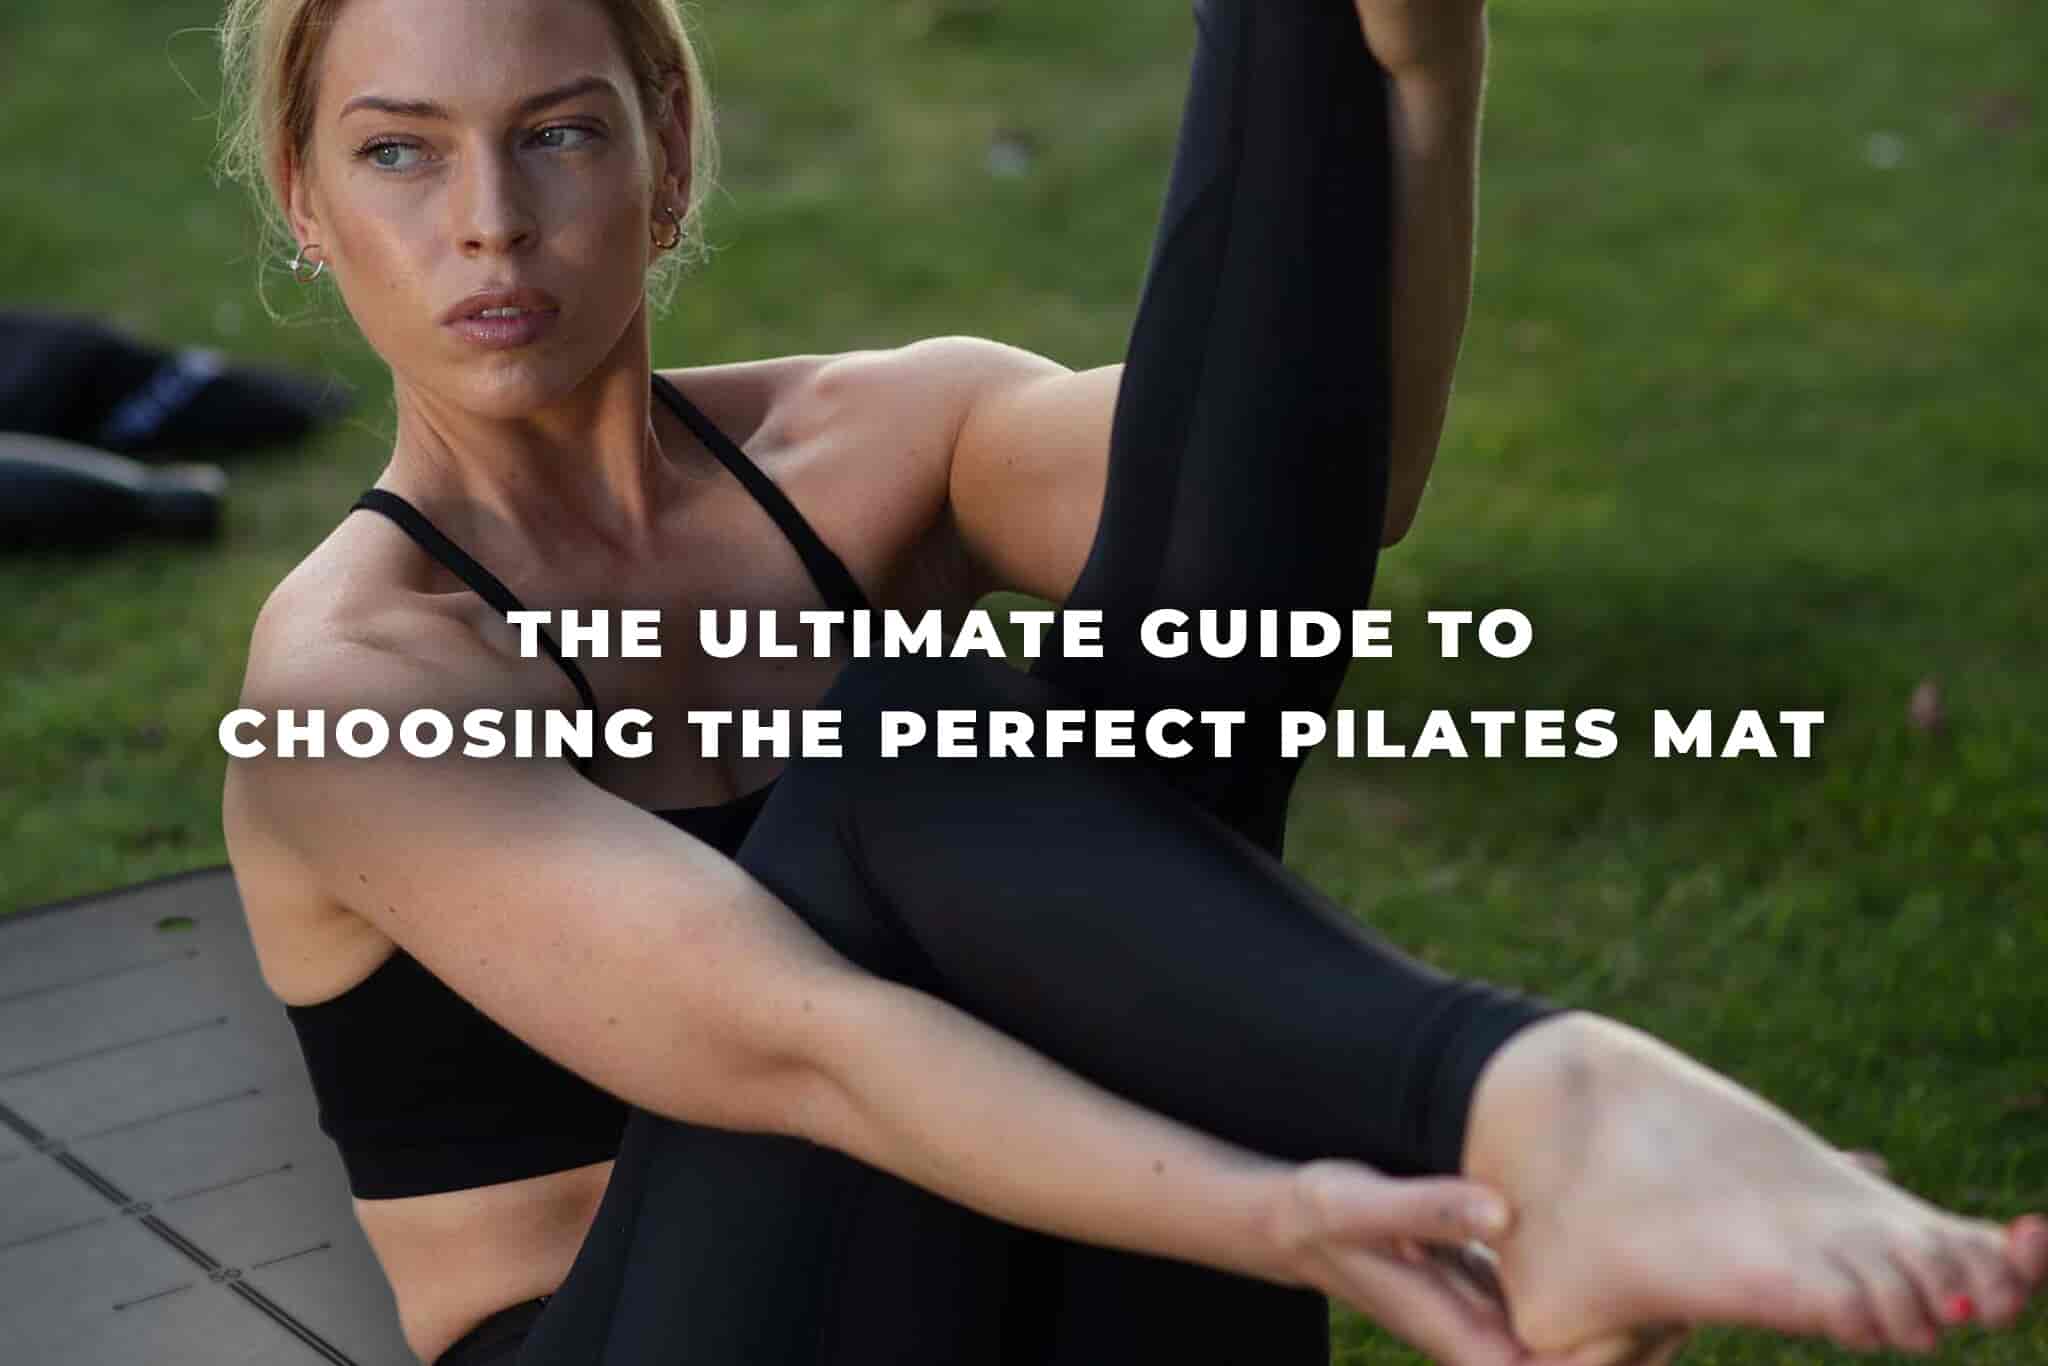 The ultimate guide to choosing the perfect pilates mat